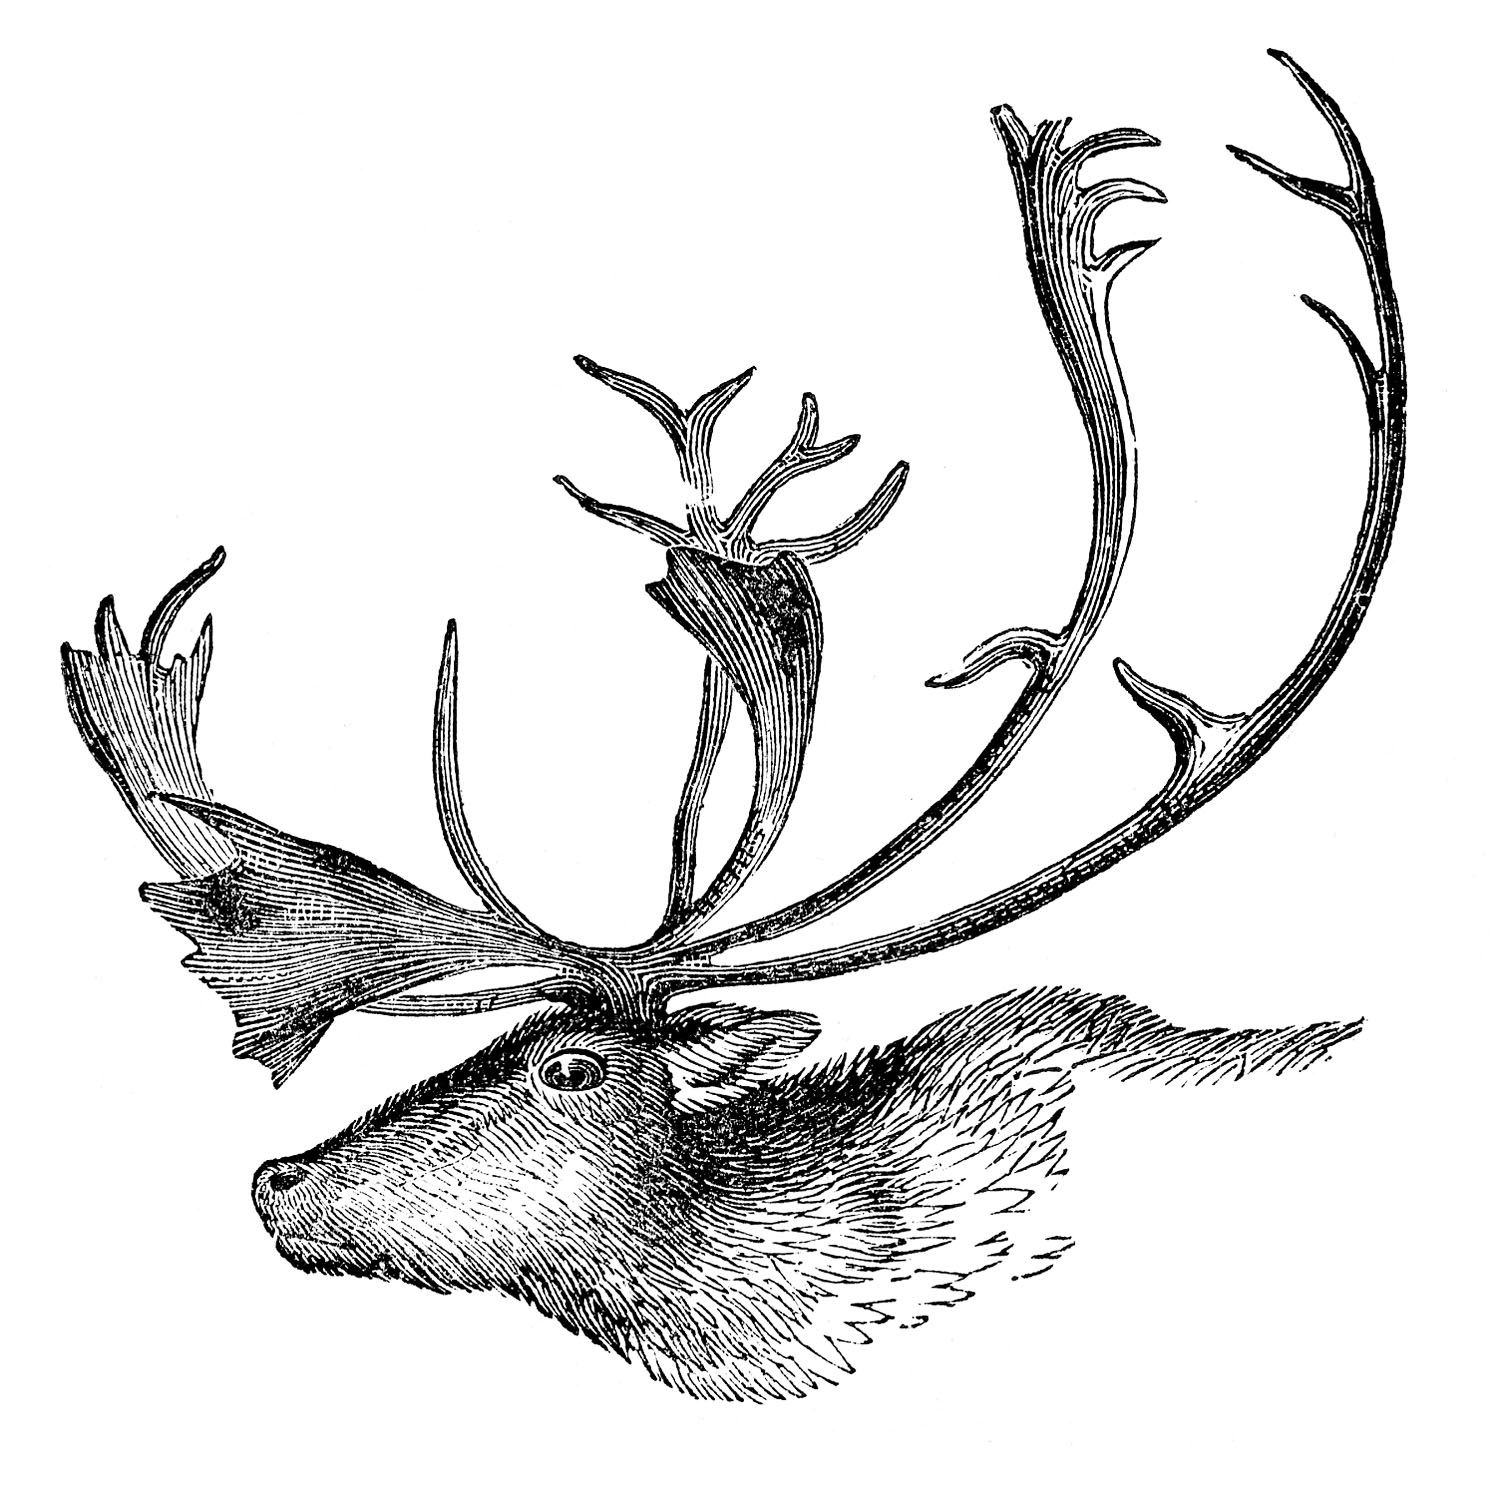 Vintage Animal Clip Art - Caribou with Antlers - The Graphics Fairy